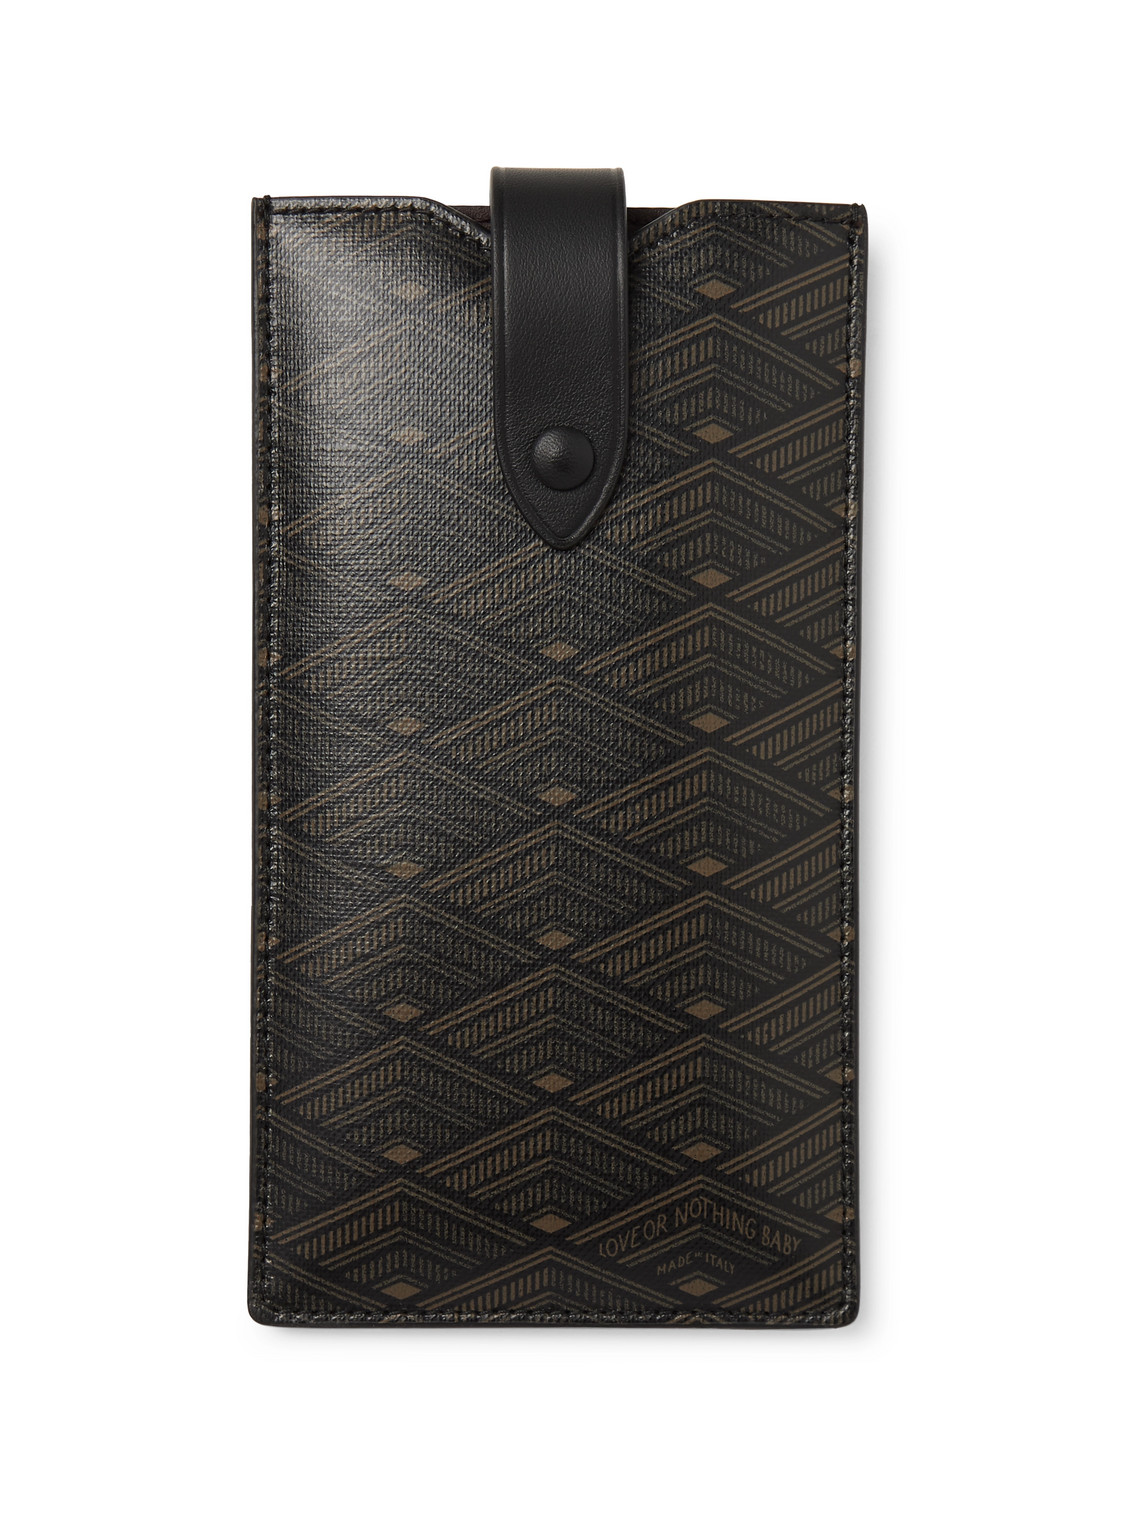 Metier From Dusk Till Dawn Printed Leather Sunglasses Case In Brown